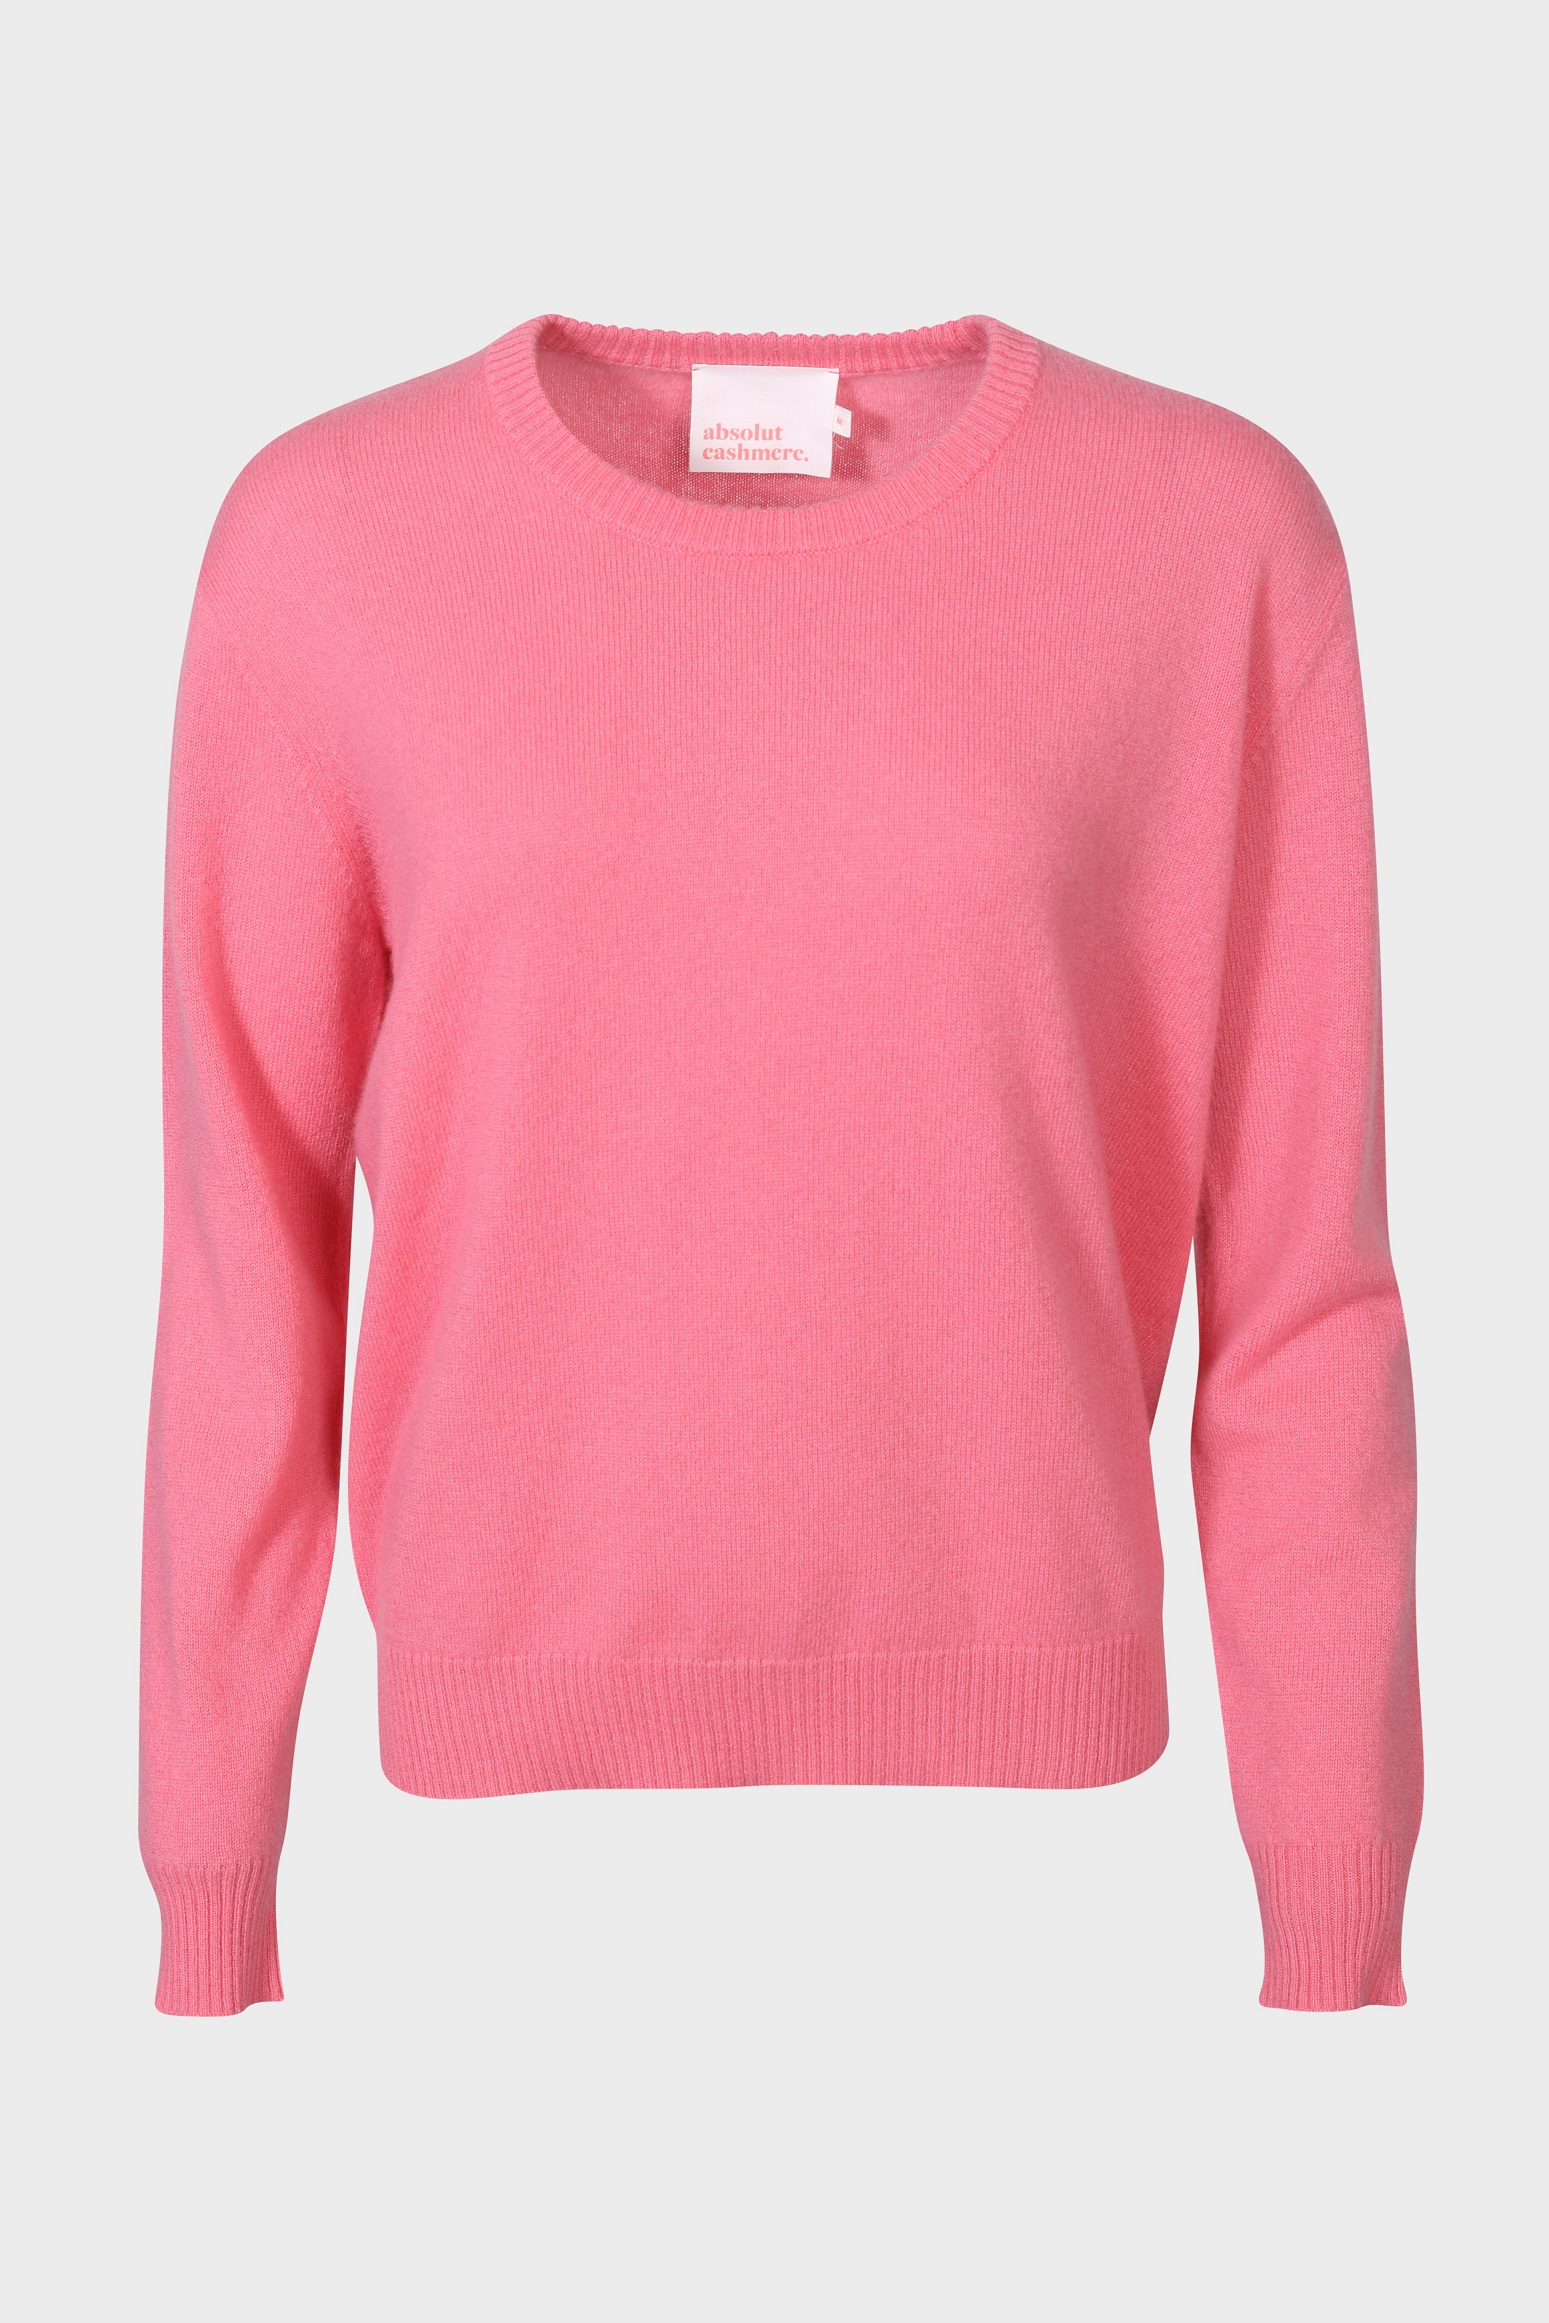 ABSOLUT CASHMERE Sweater Ysee Flamingo S